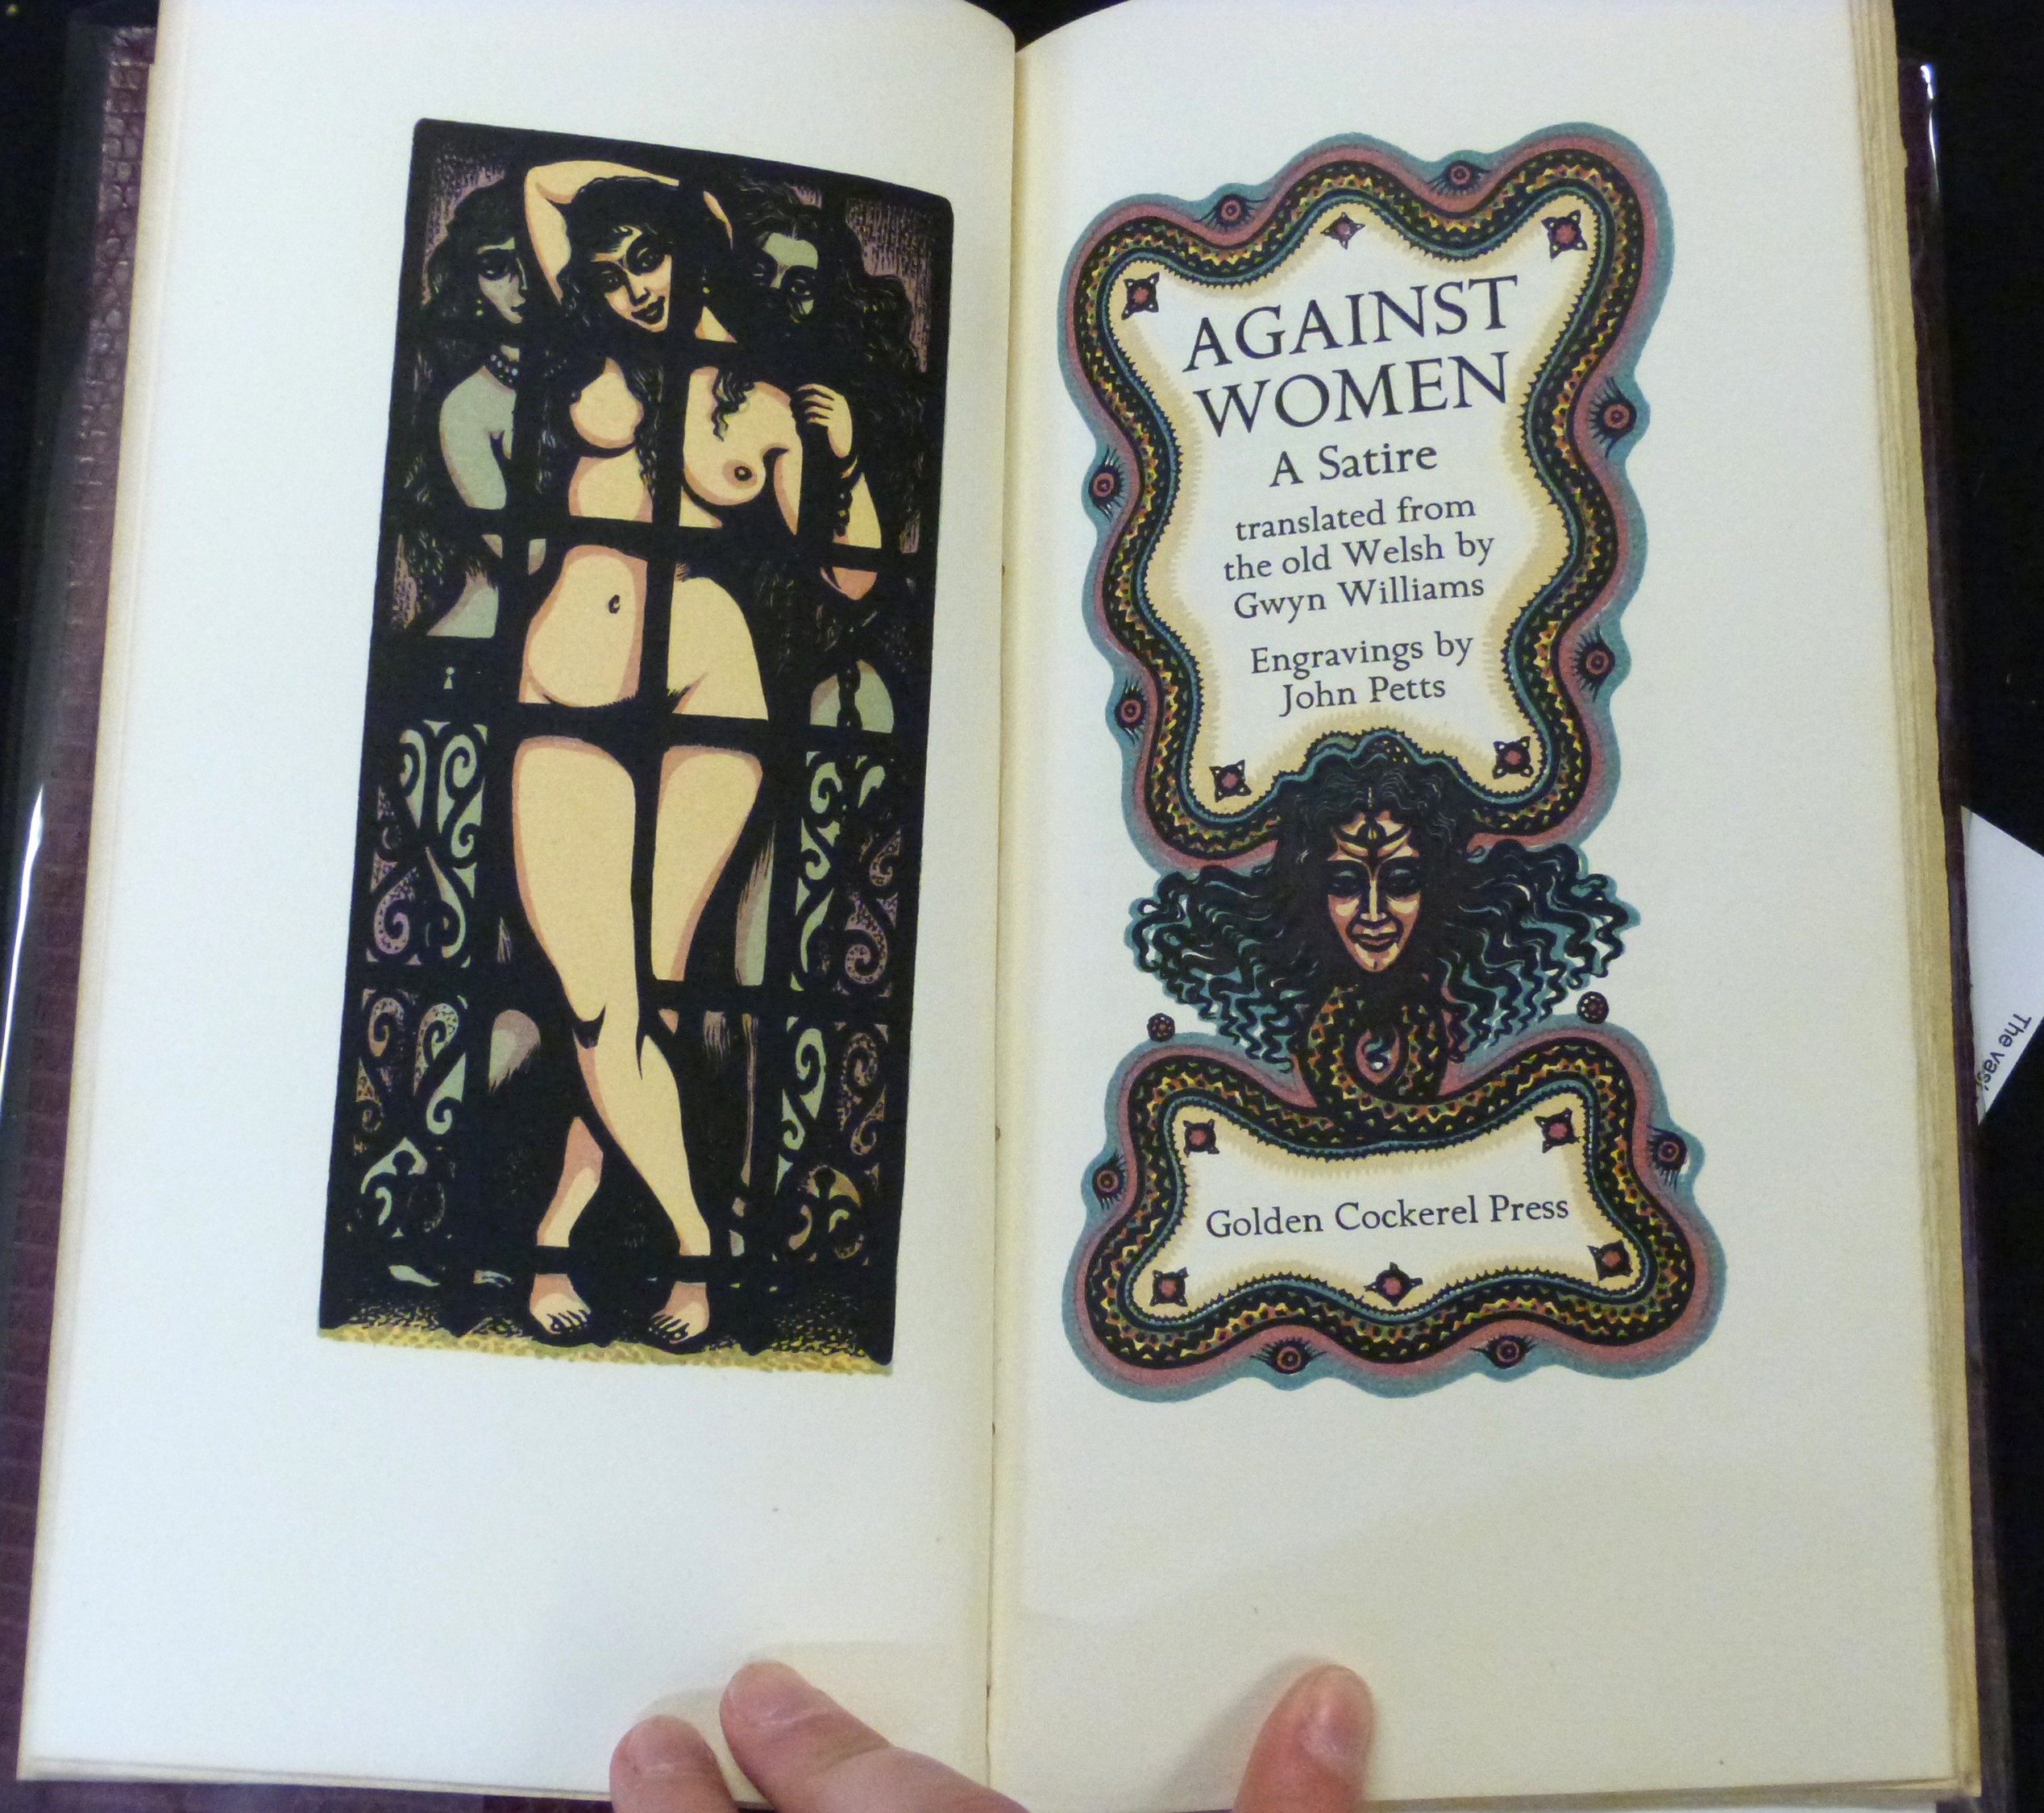 GWYN WILLIAMS: AGAINST WOMEN, A SATIRE TRANSLATED FROM THE OLD WELSH, ill John Petts, London, Golden